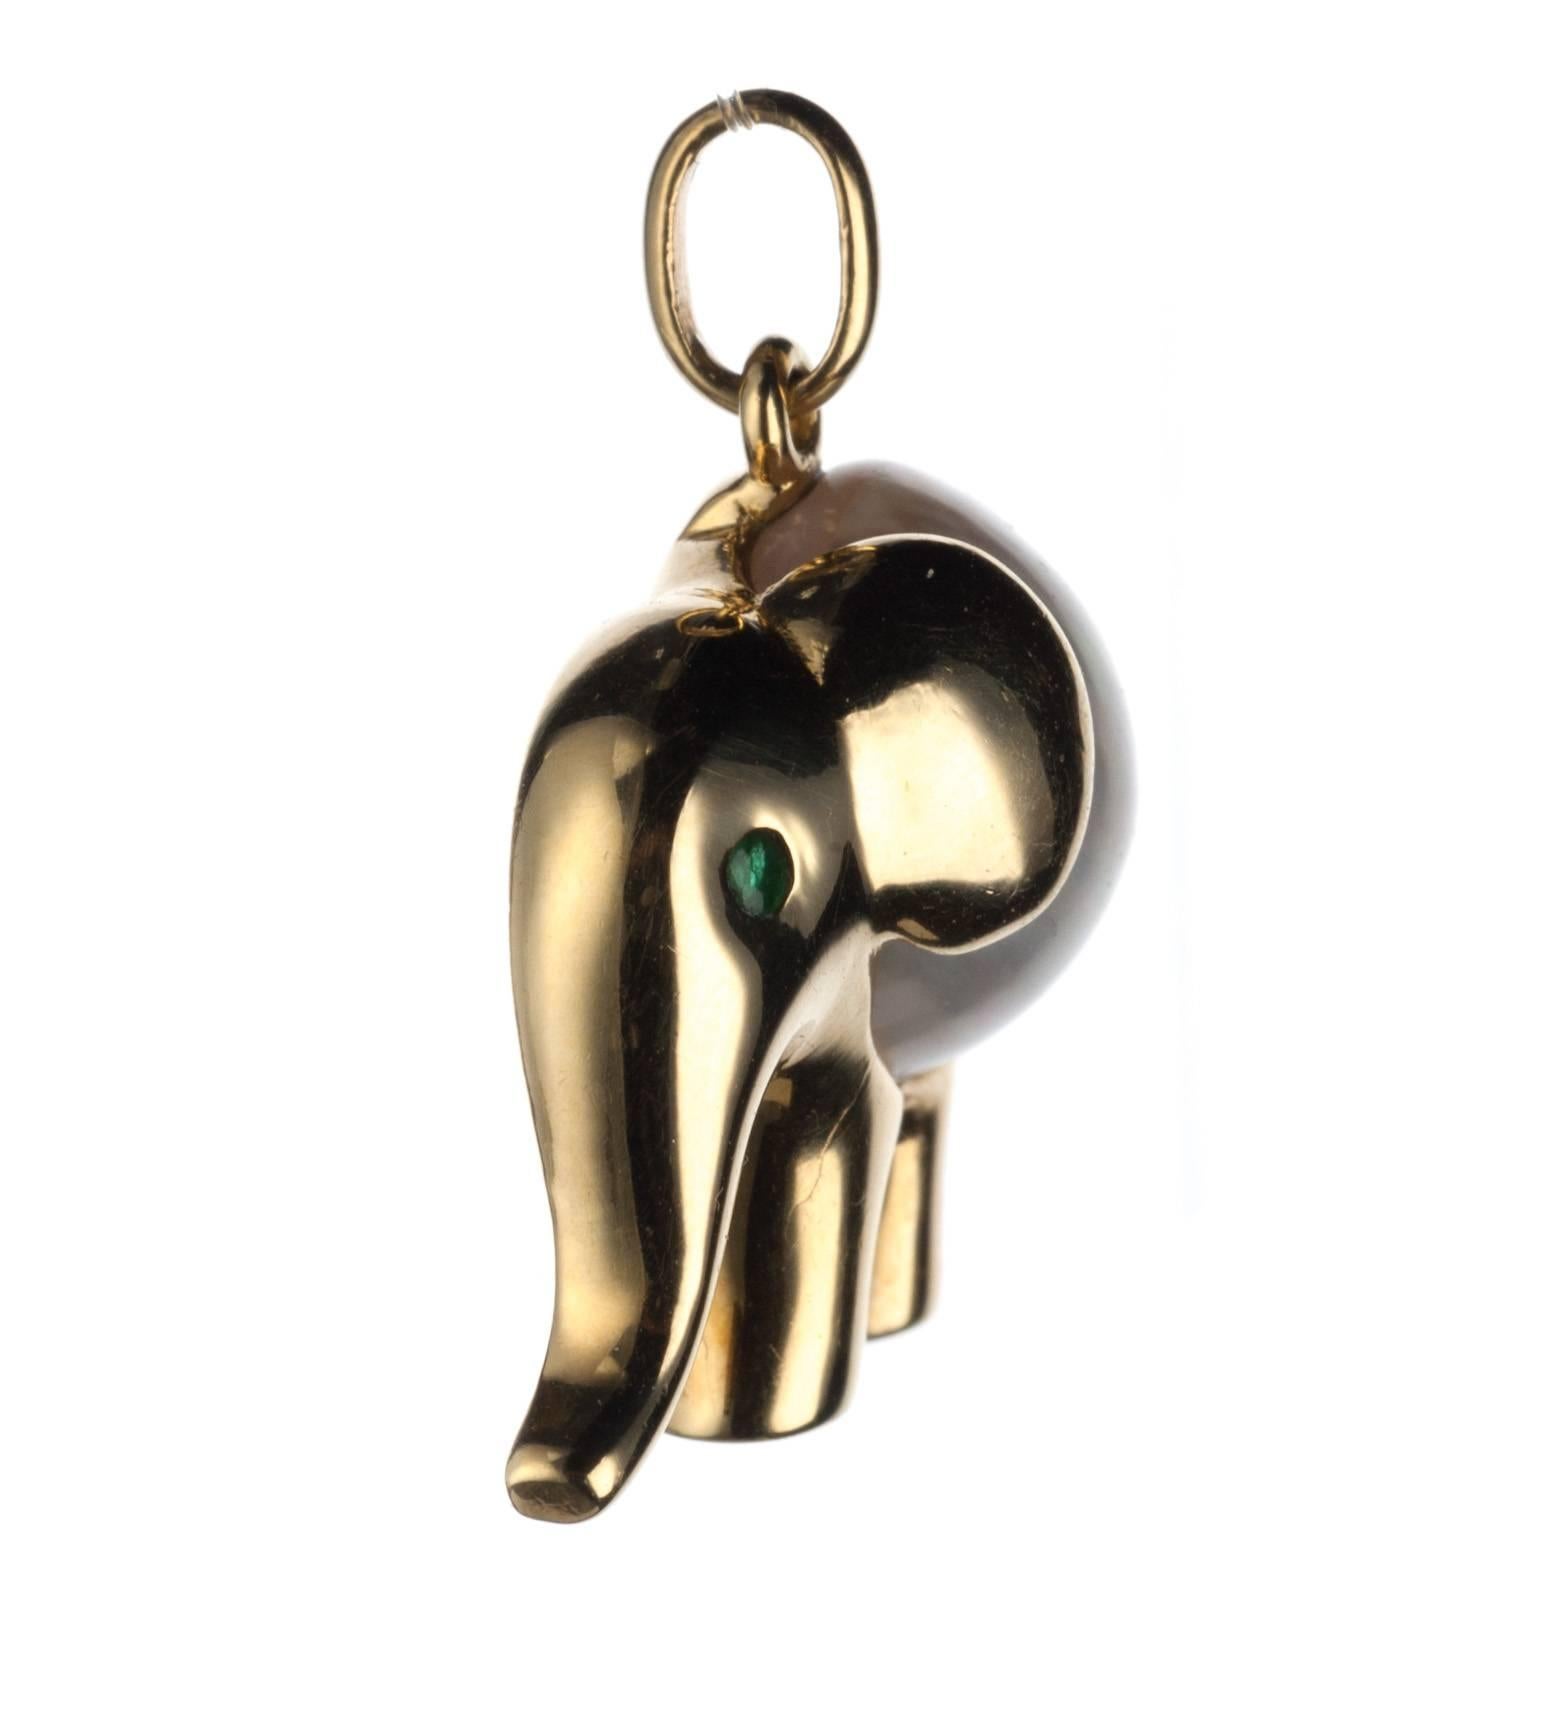 Adorable in its petite proportions, an elephant pendant from Parisian designer FRED. A cultured Mabe pearl makes up the elephant’s chubby body while the eye visible in profile is set with a single round emerald. Measures approx. 0.75” square.